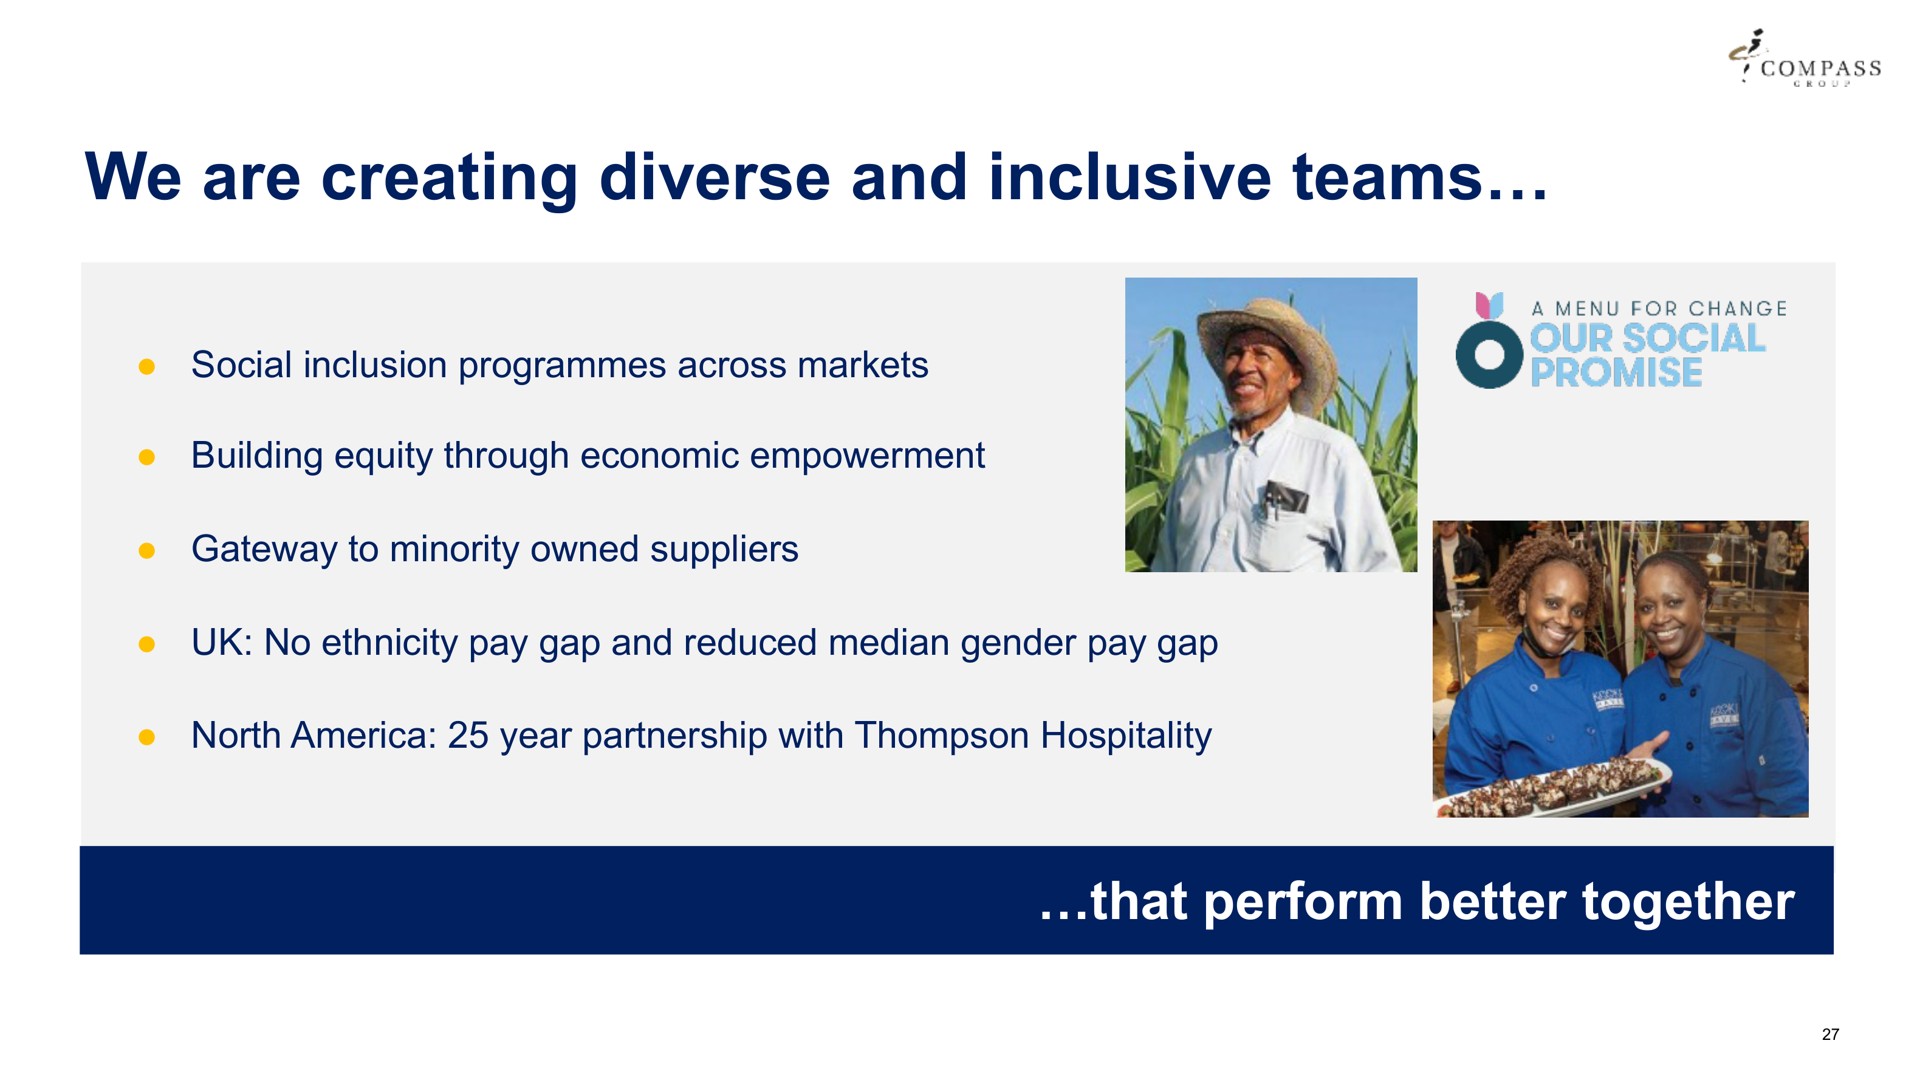 we are creating diverse and inclusive teams compass social inclusion programmes across markets building equity through economic empowerment gateway to minority owned suppliers no pay gap reduced median gender pay gap north year partnership with hospitality a i a | Compass Group